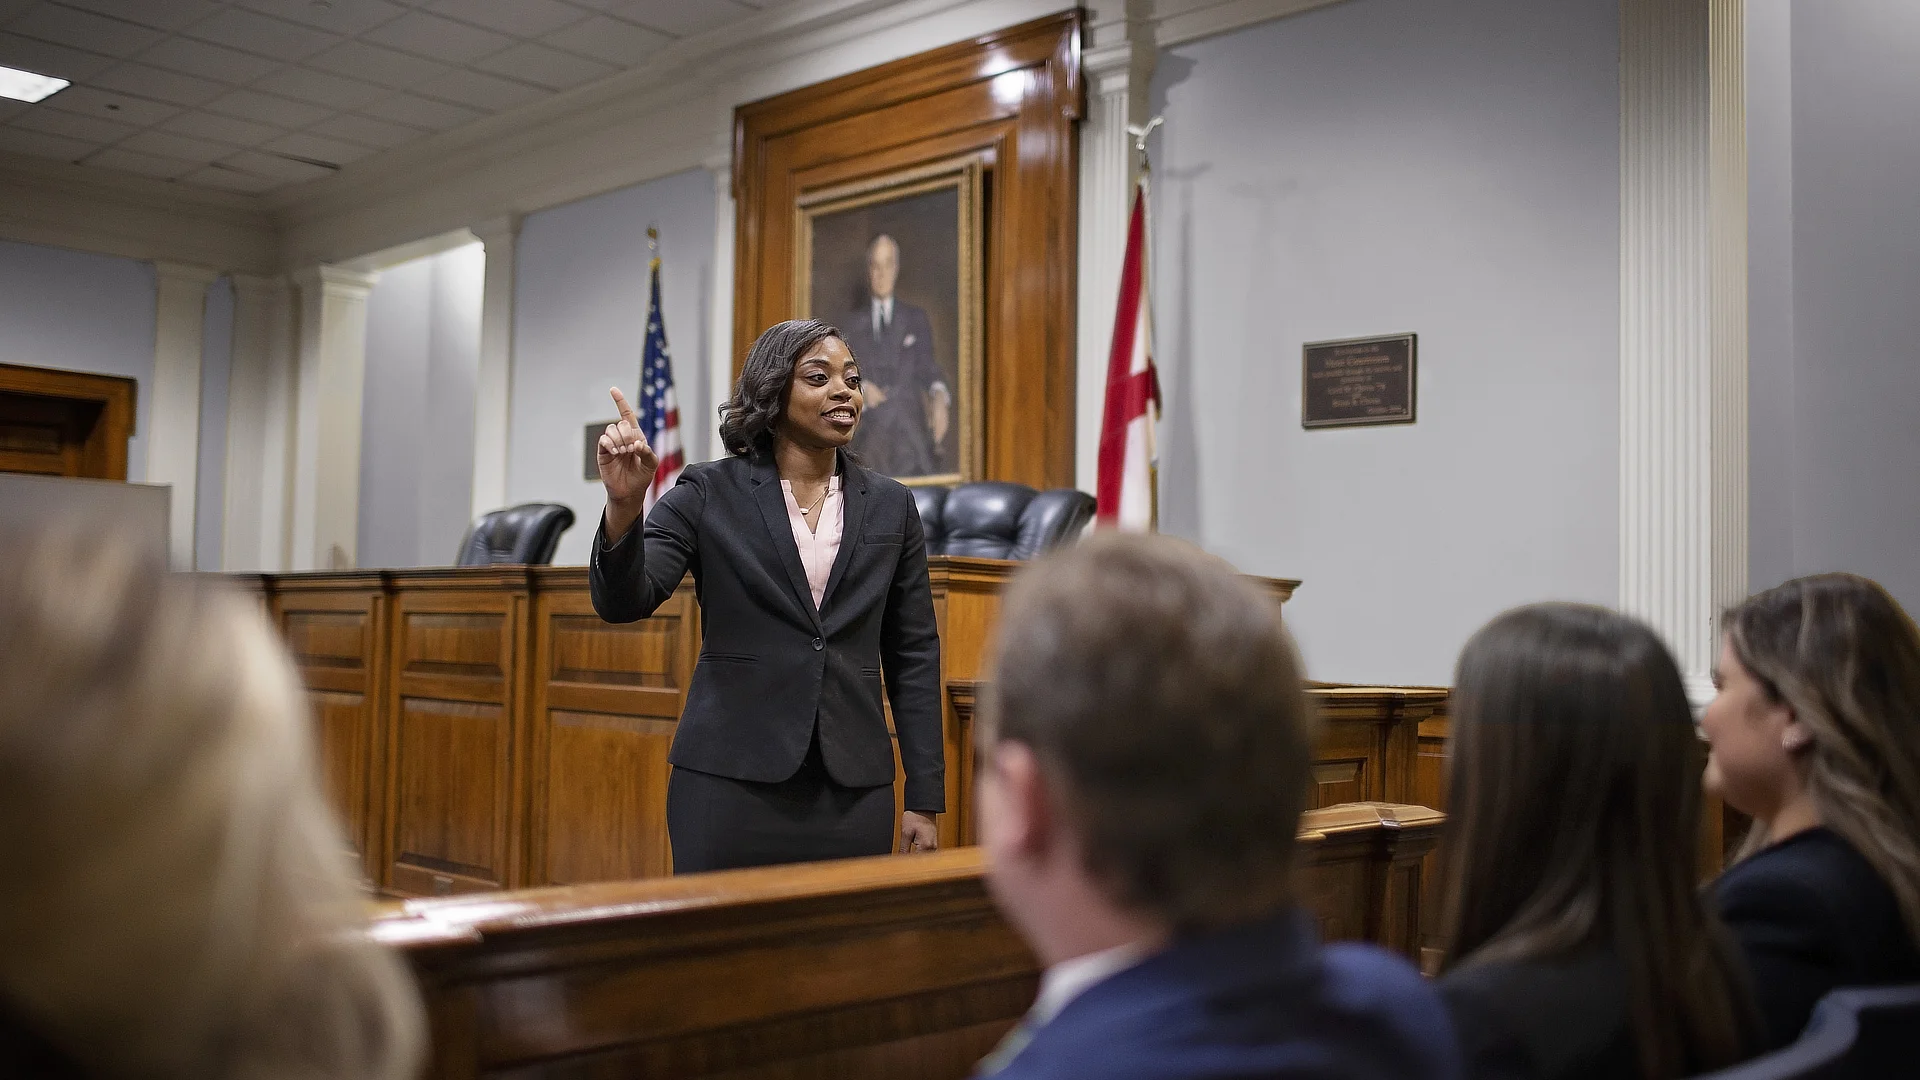 Law Student Speaking in Courtroom